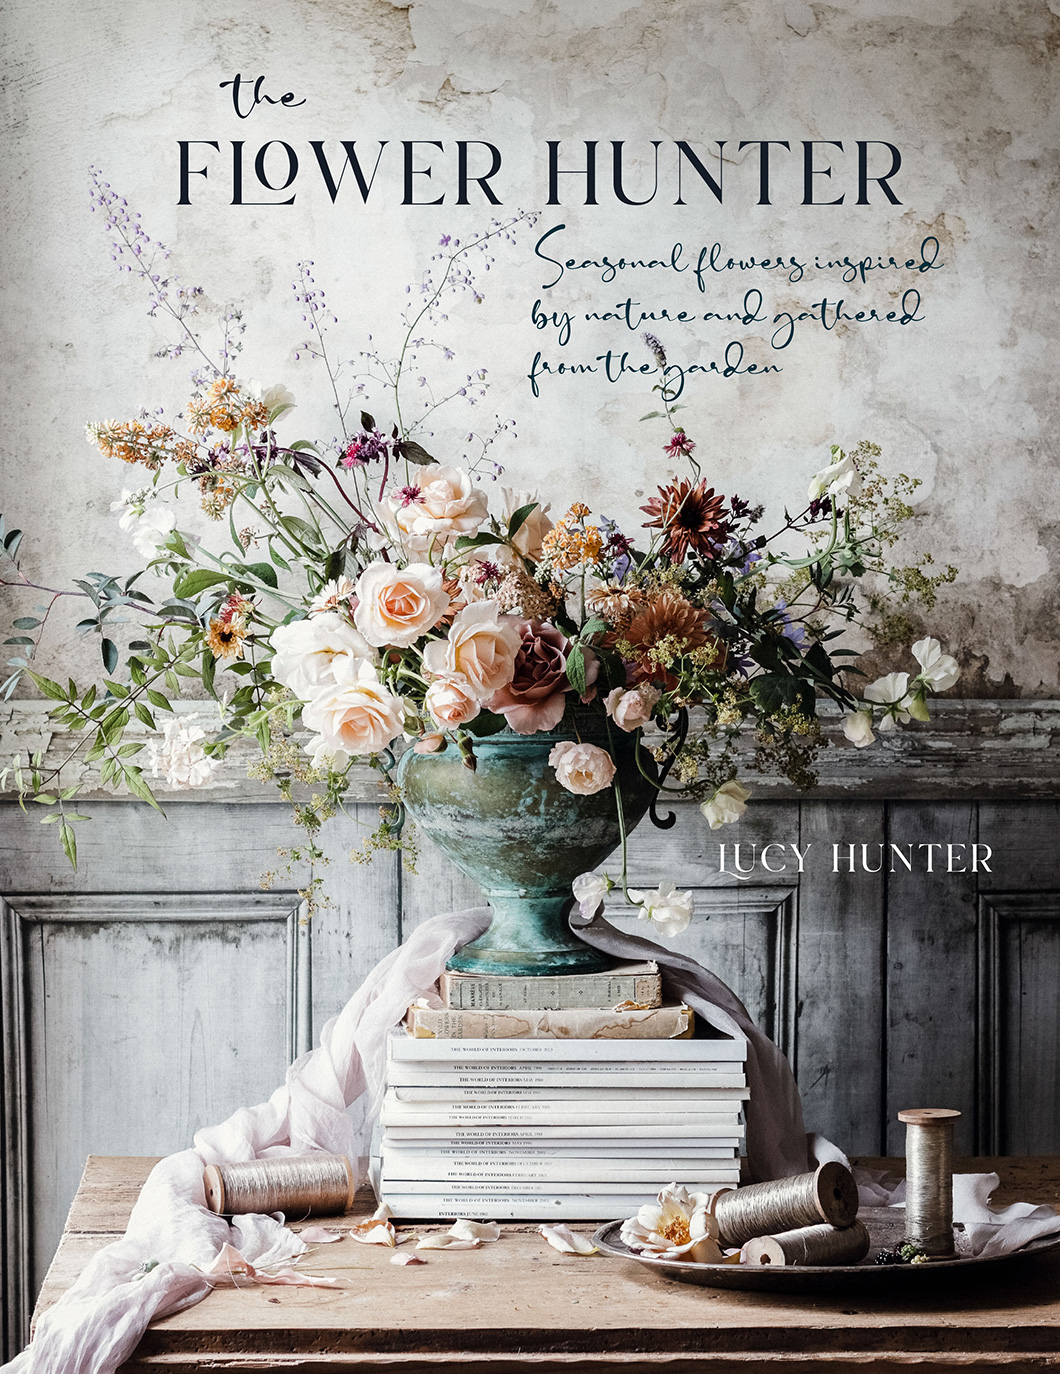 Lucy Hunter book cover.